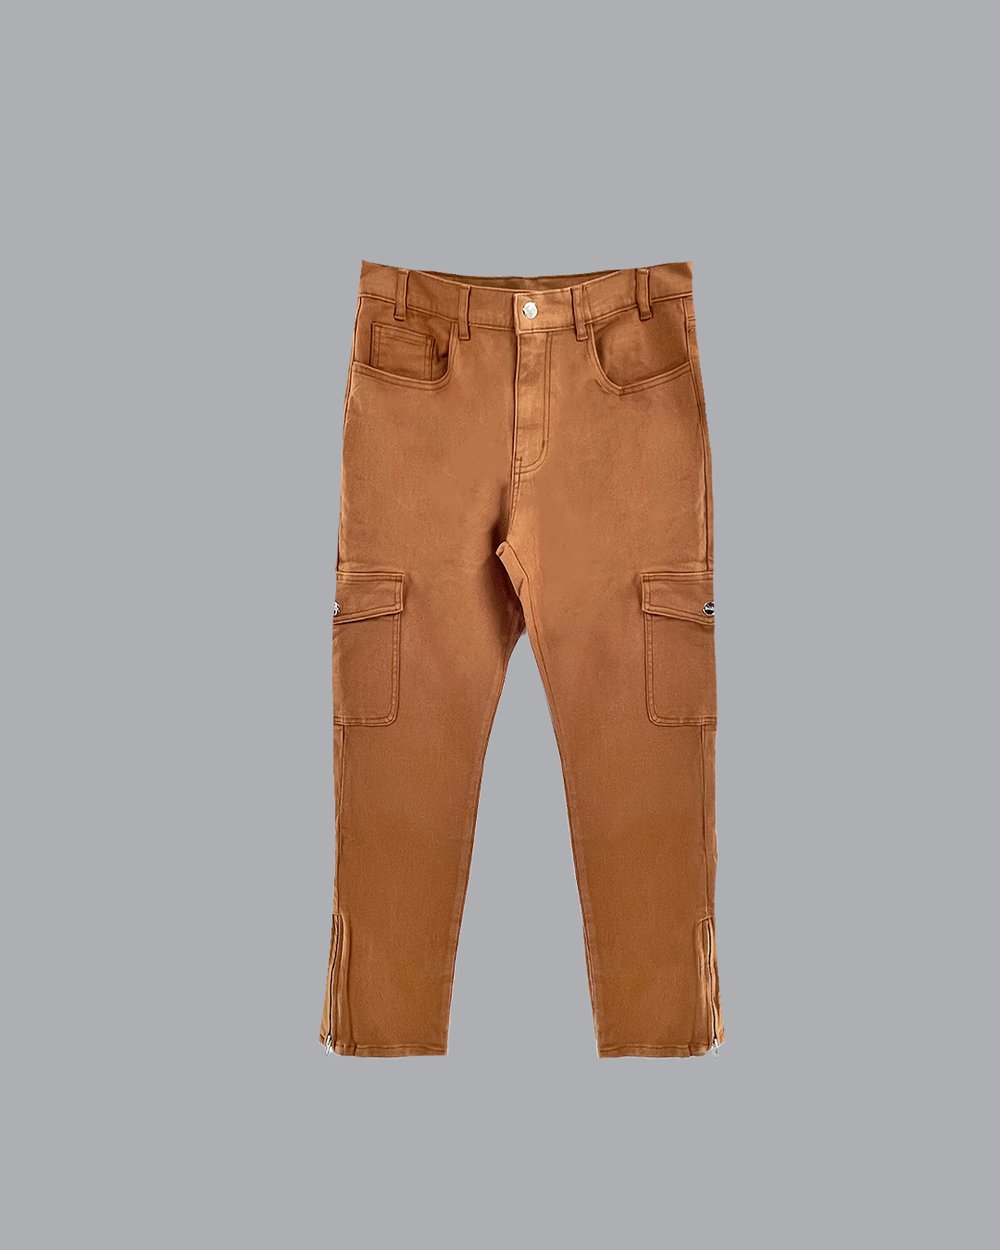 Image of The BLAK Denim Jeans in Rich Brown